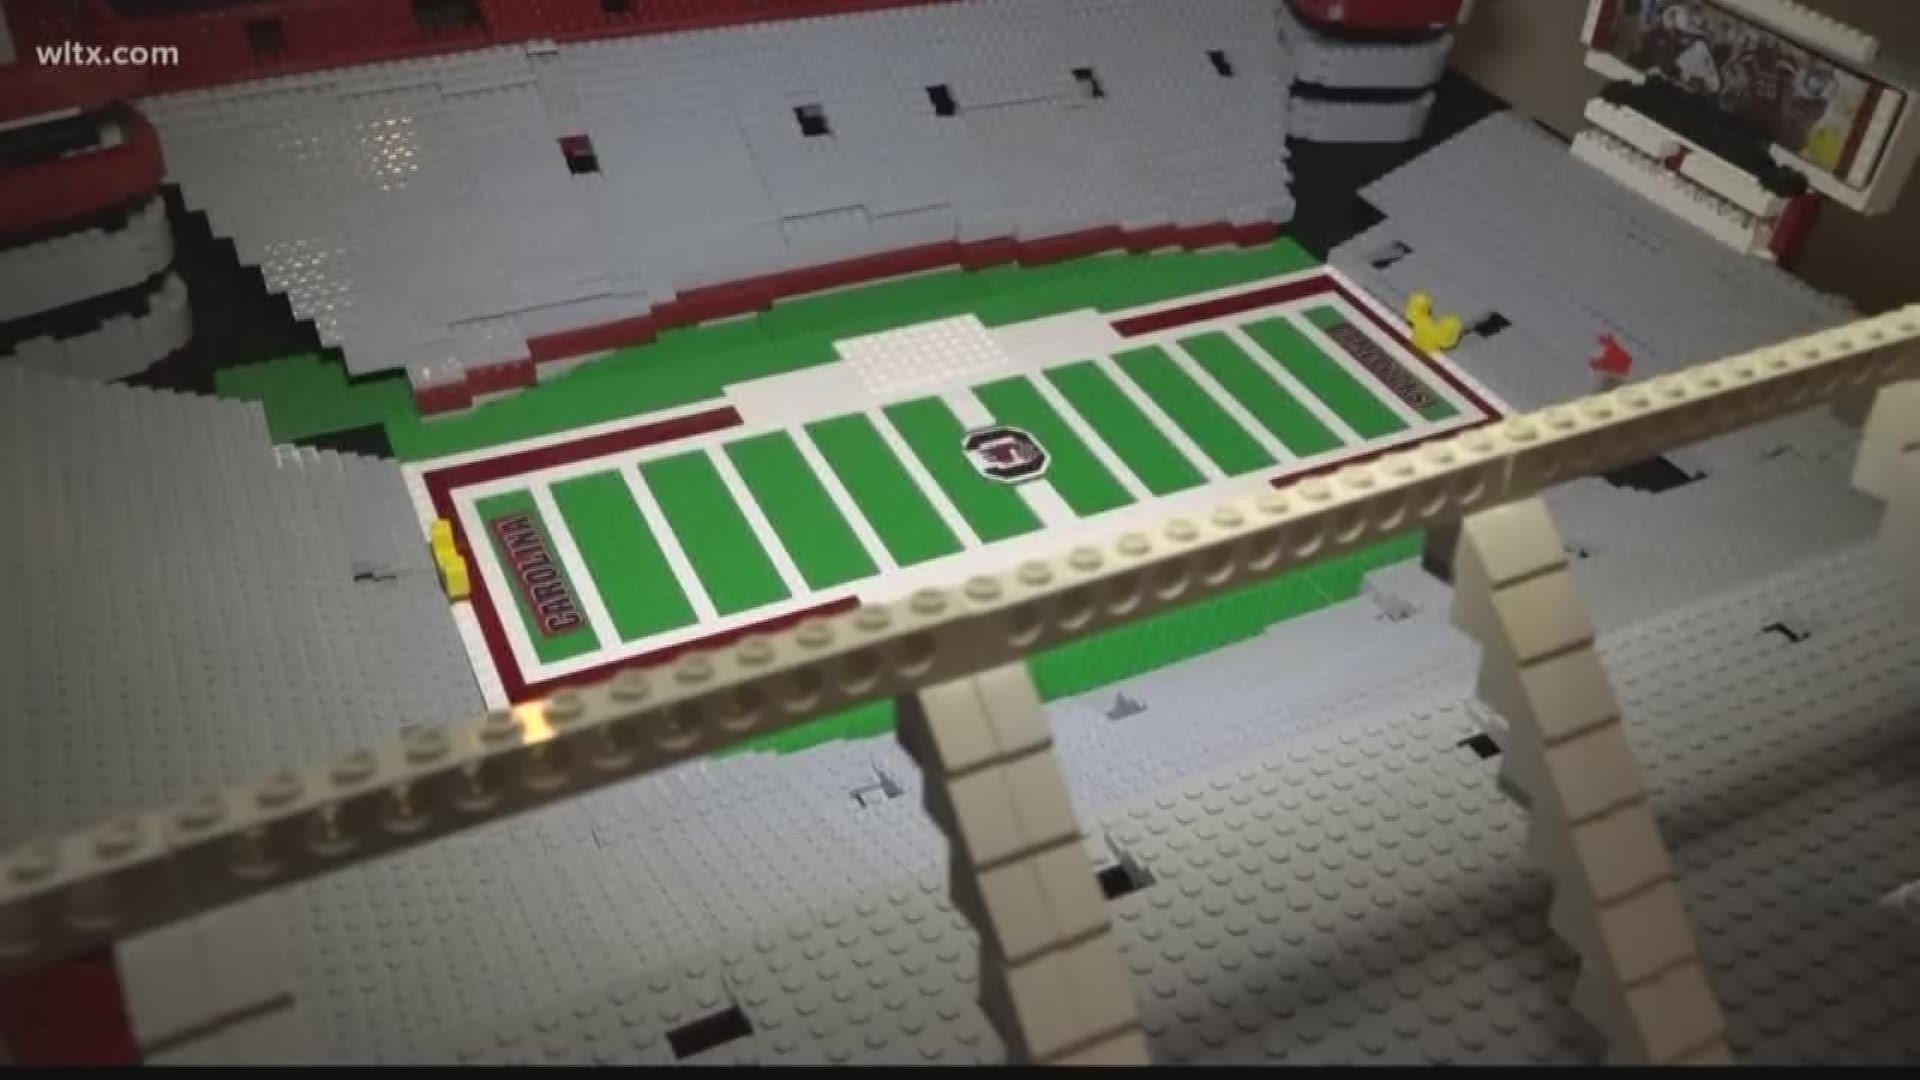 David Robinson and David Jr have made a LEGO Williams Brice Stadium in Charleston that is getting a lot of attention but the best part about this fun story is that a father and son are getting closer. 